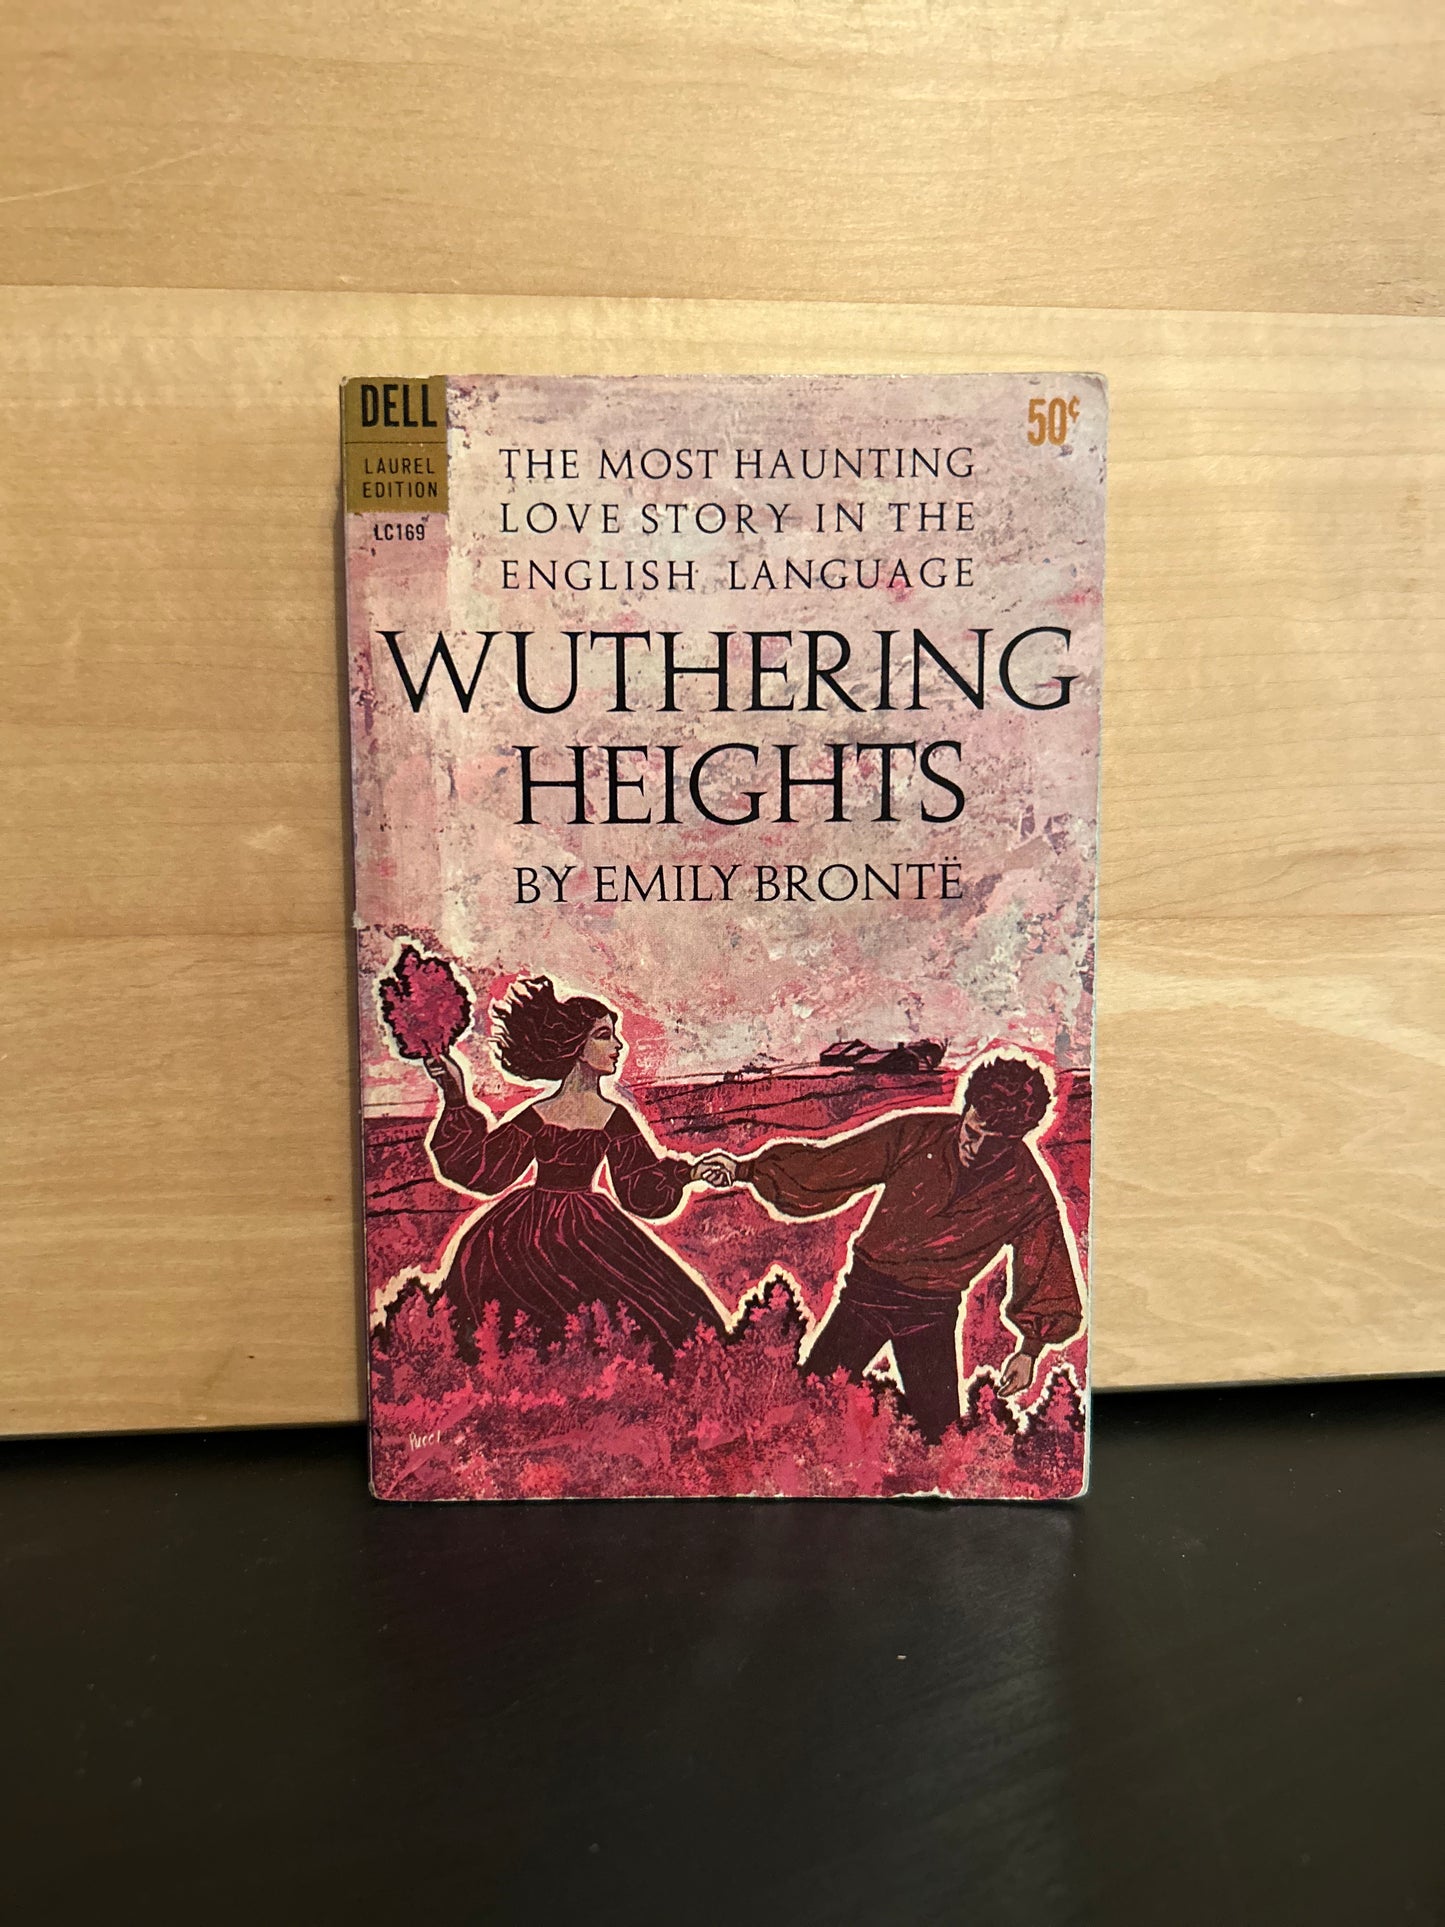 Wuthering Heights - Emily Bronte - Dell